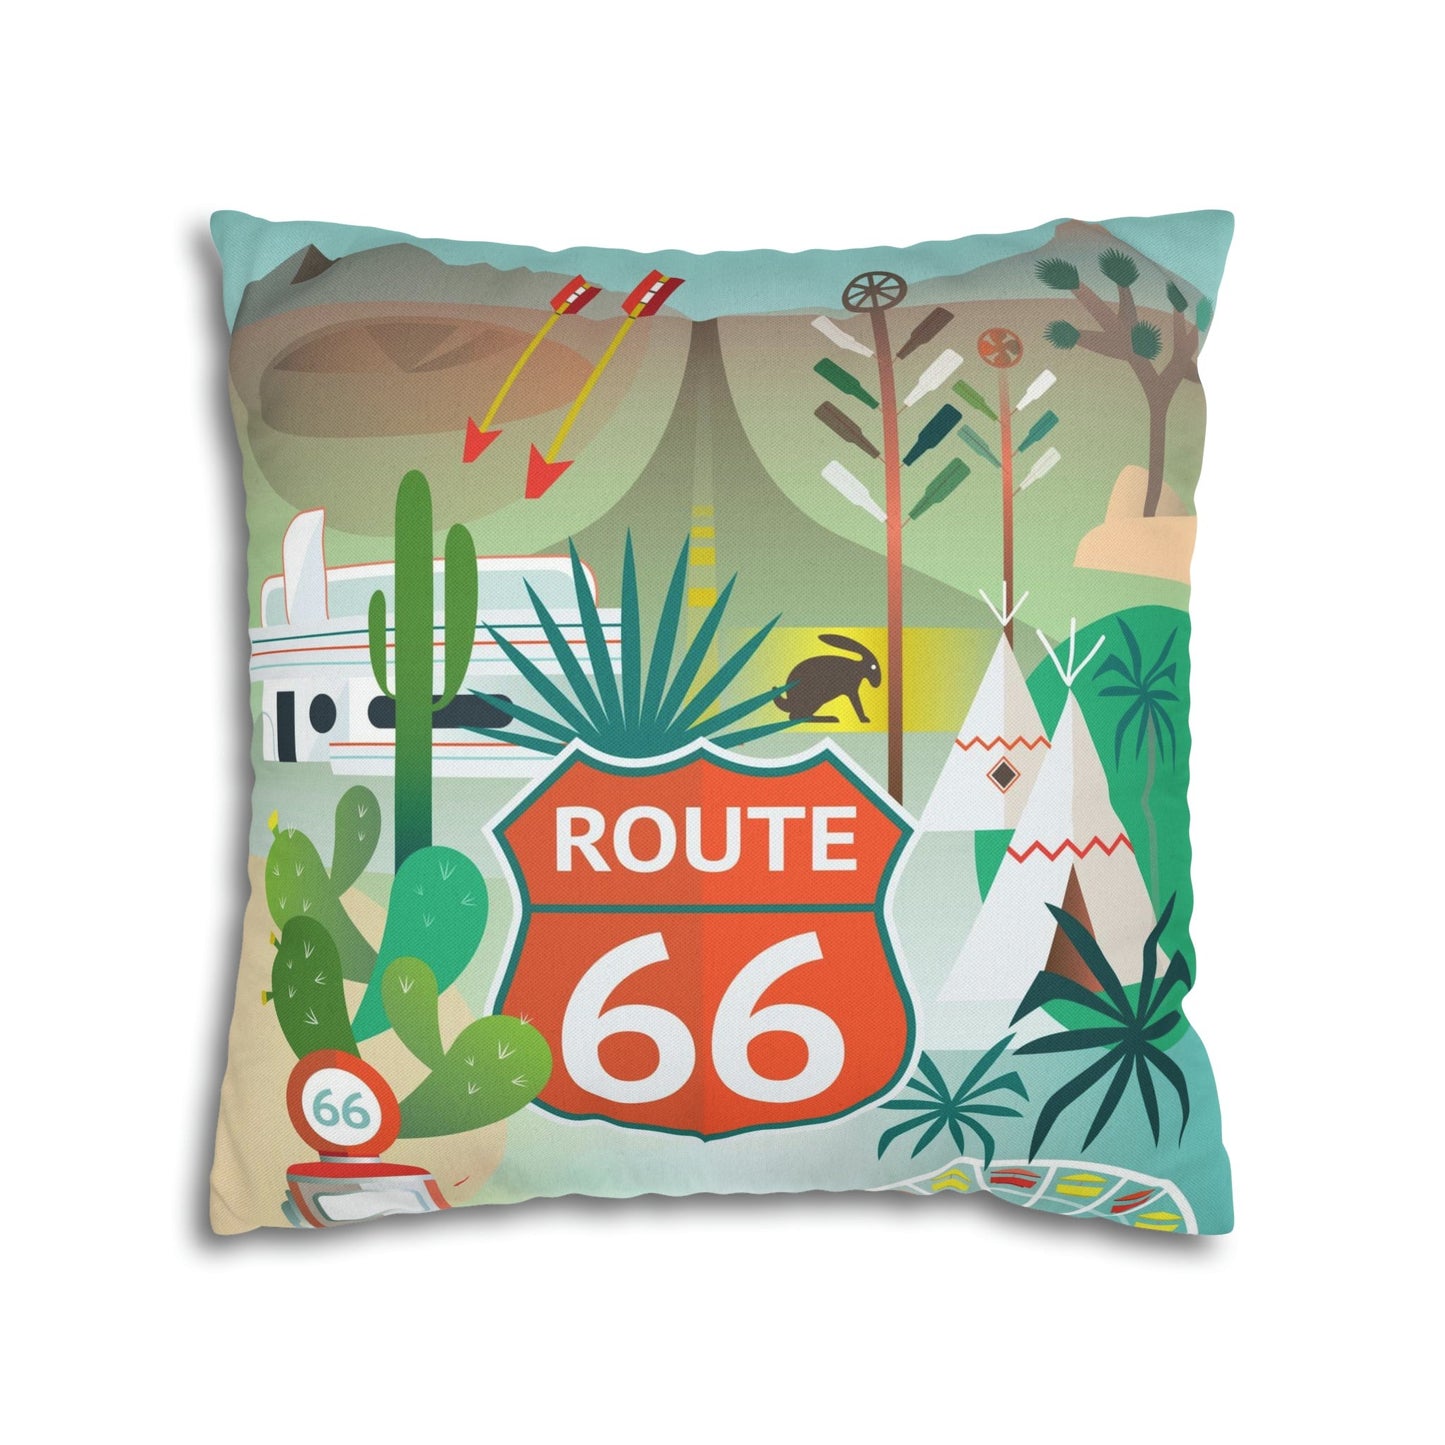 Route 66 Cushion Cover